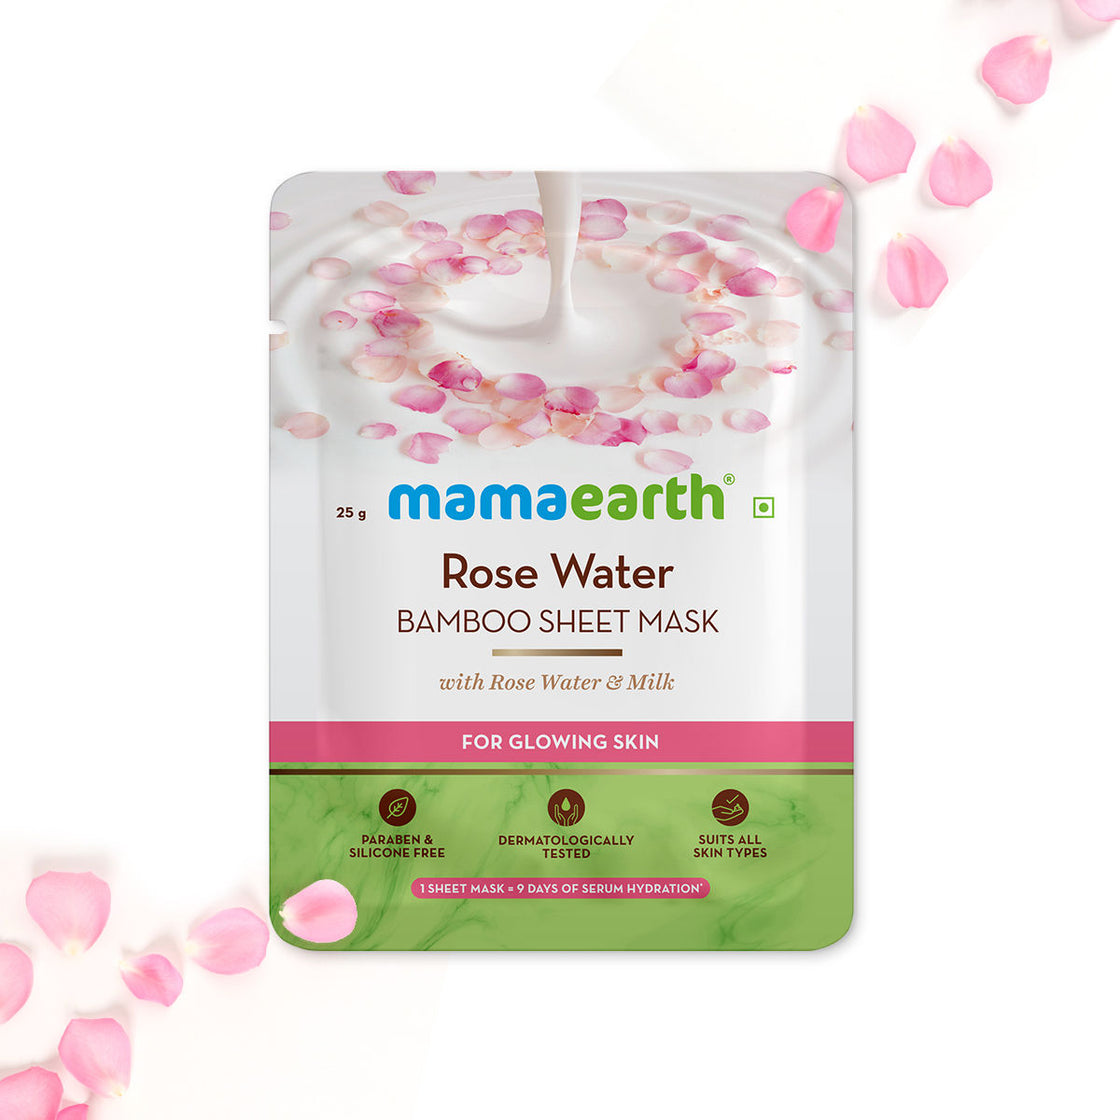 Mamaearth Rose Water Bamboo Sheet Mask With Rose Water & Milk For Glowing Skin